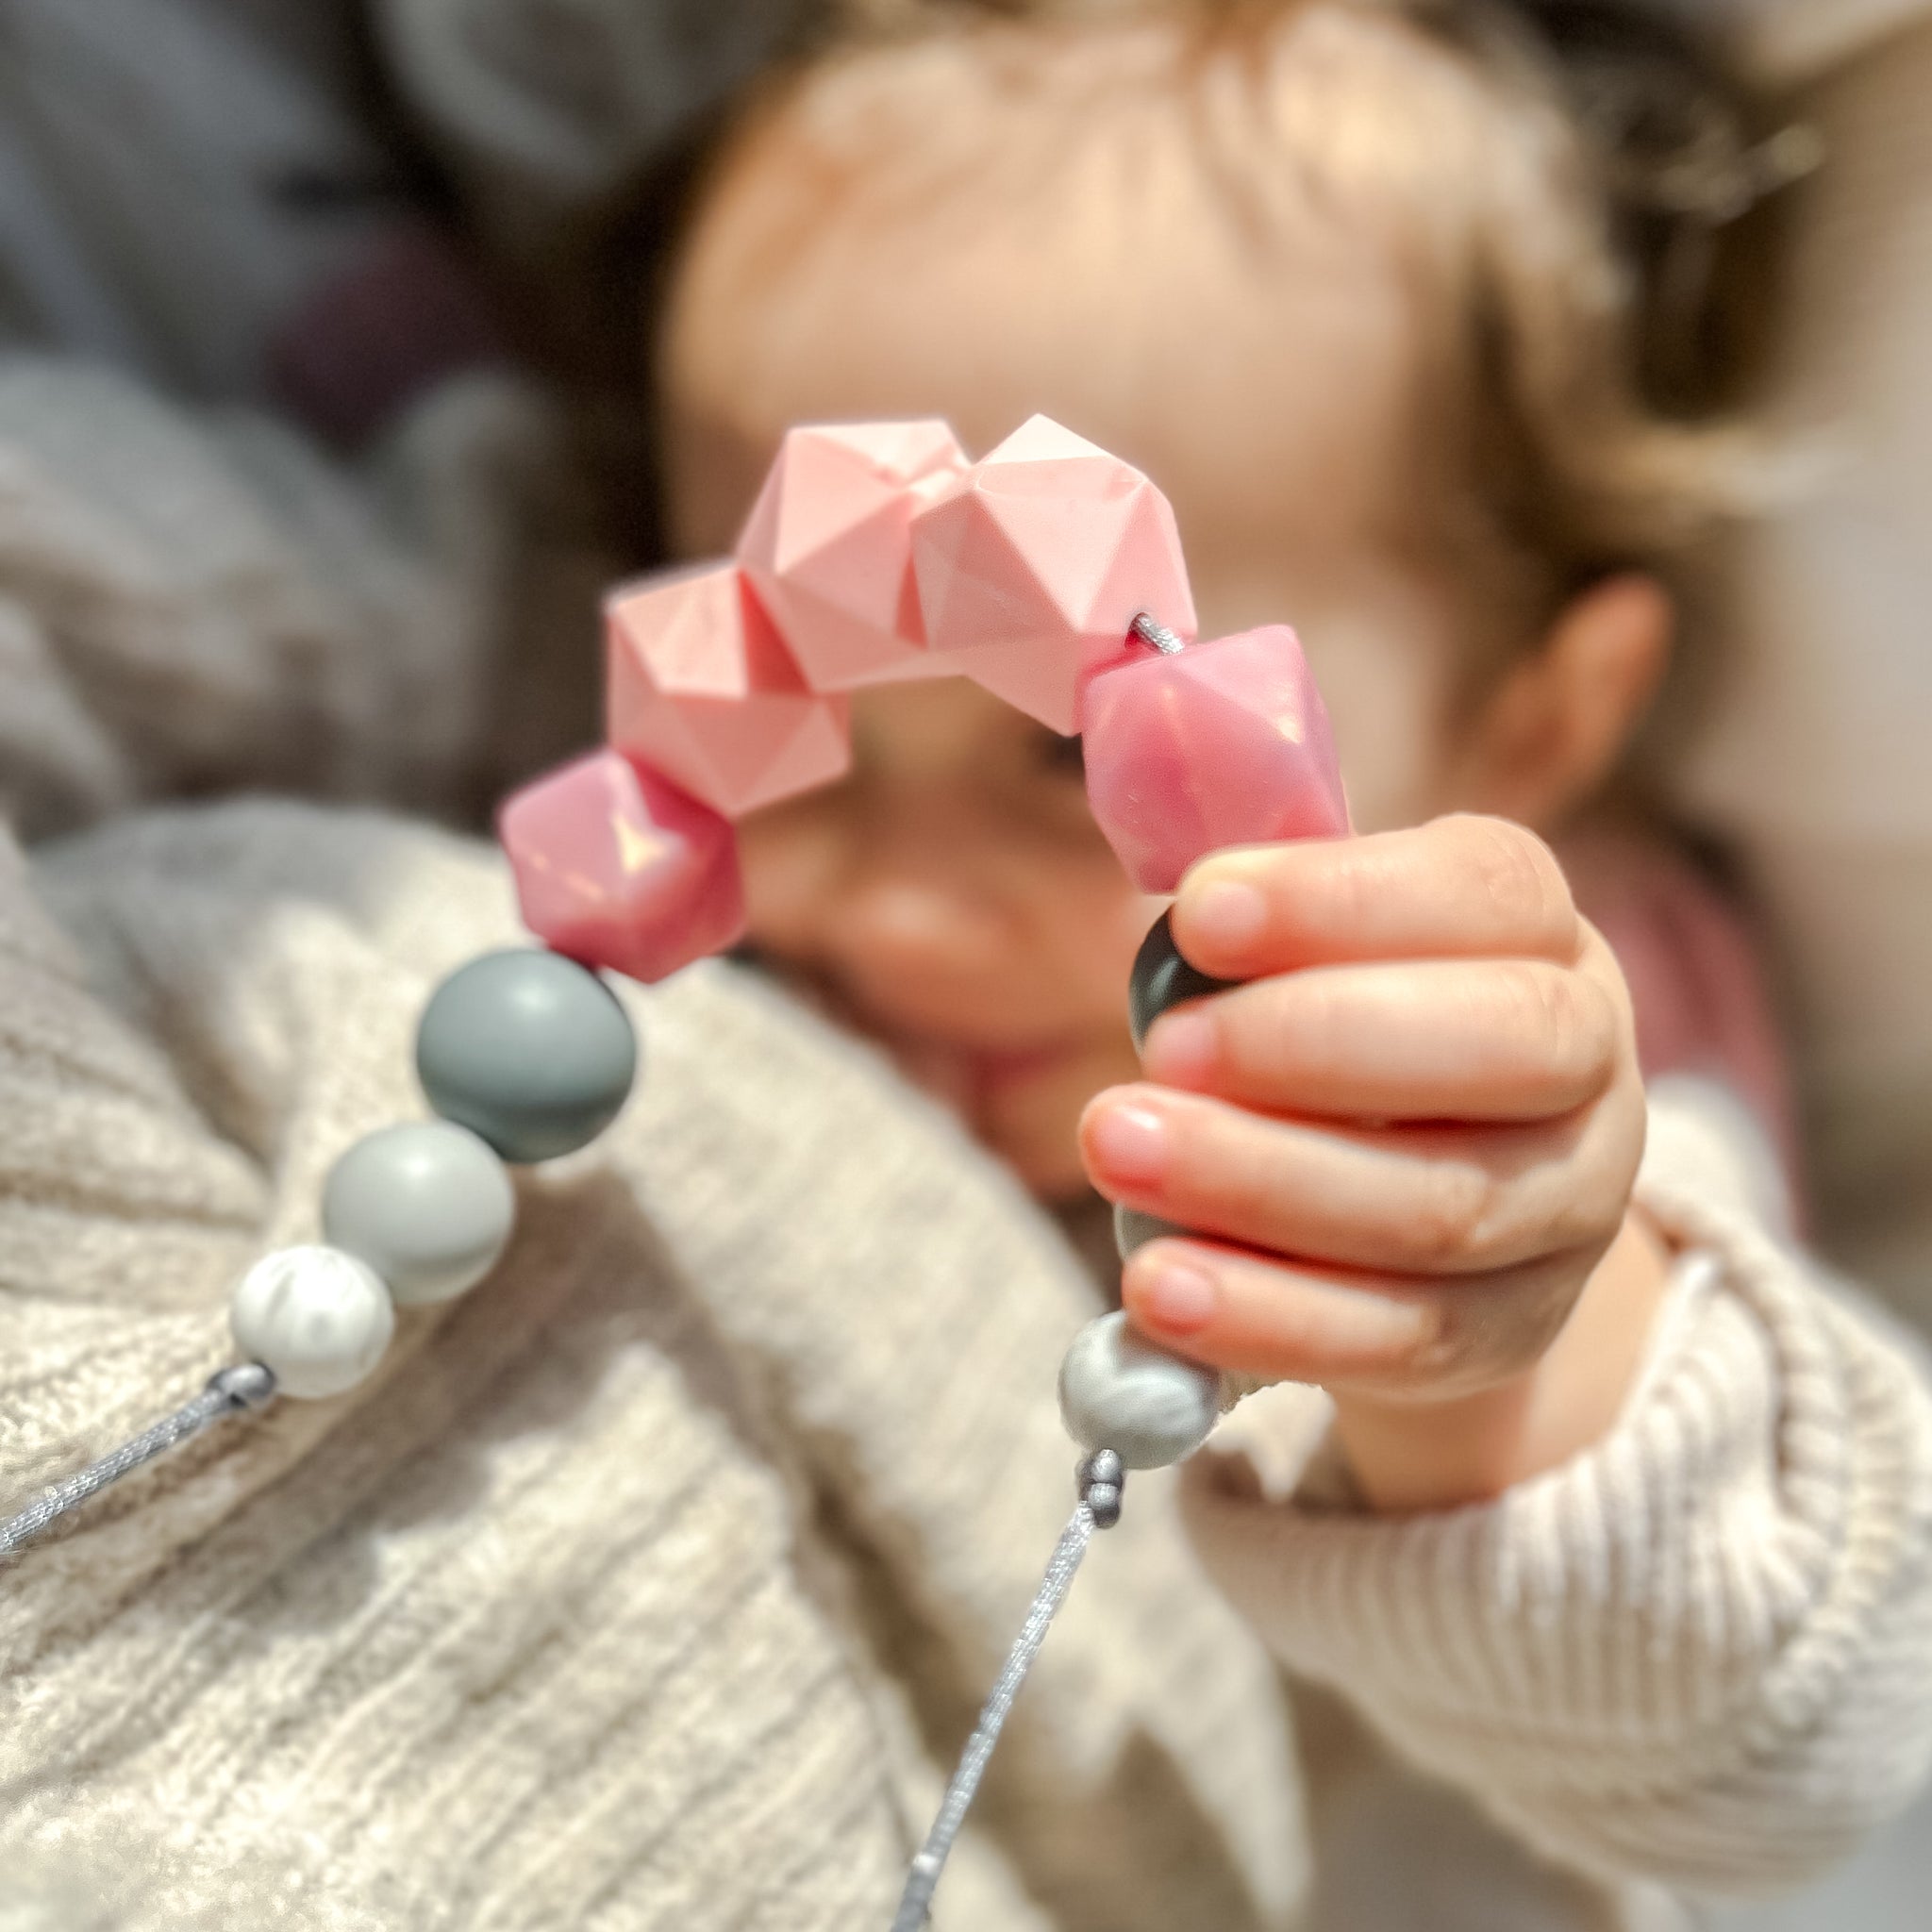 Why use a Breastfeeding necklace for your pinching tugging teething baby?  Post